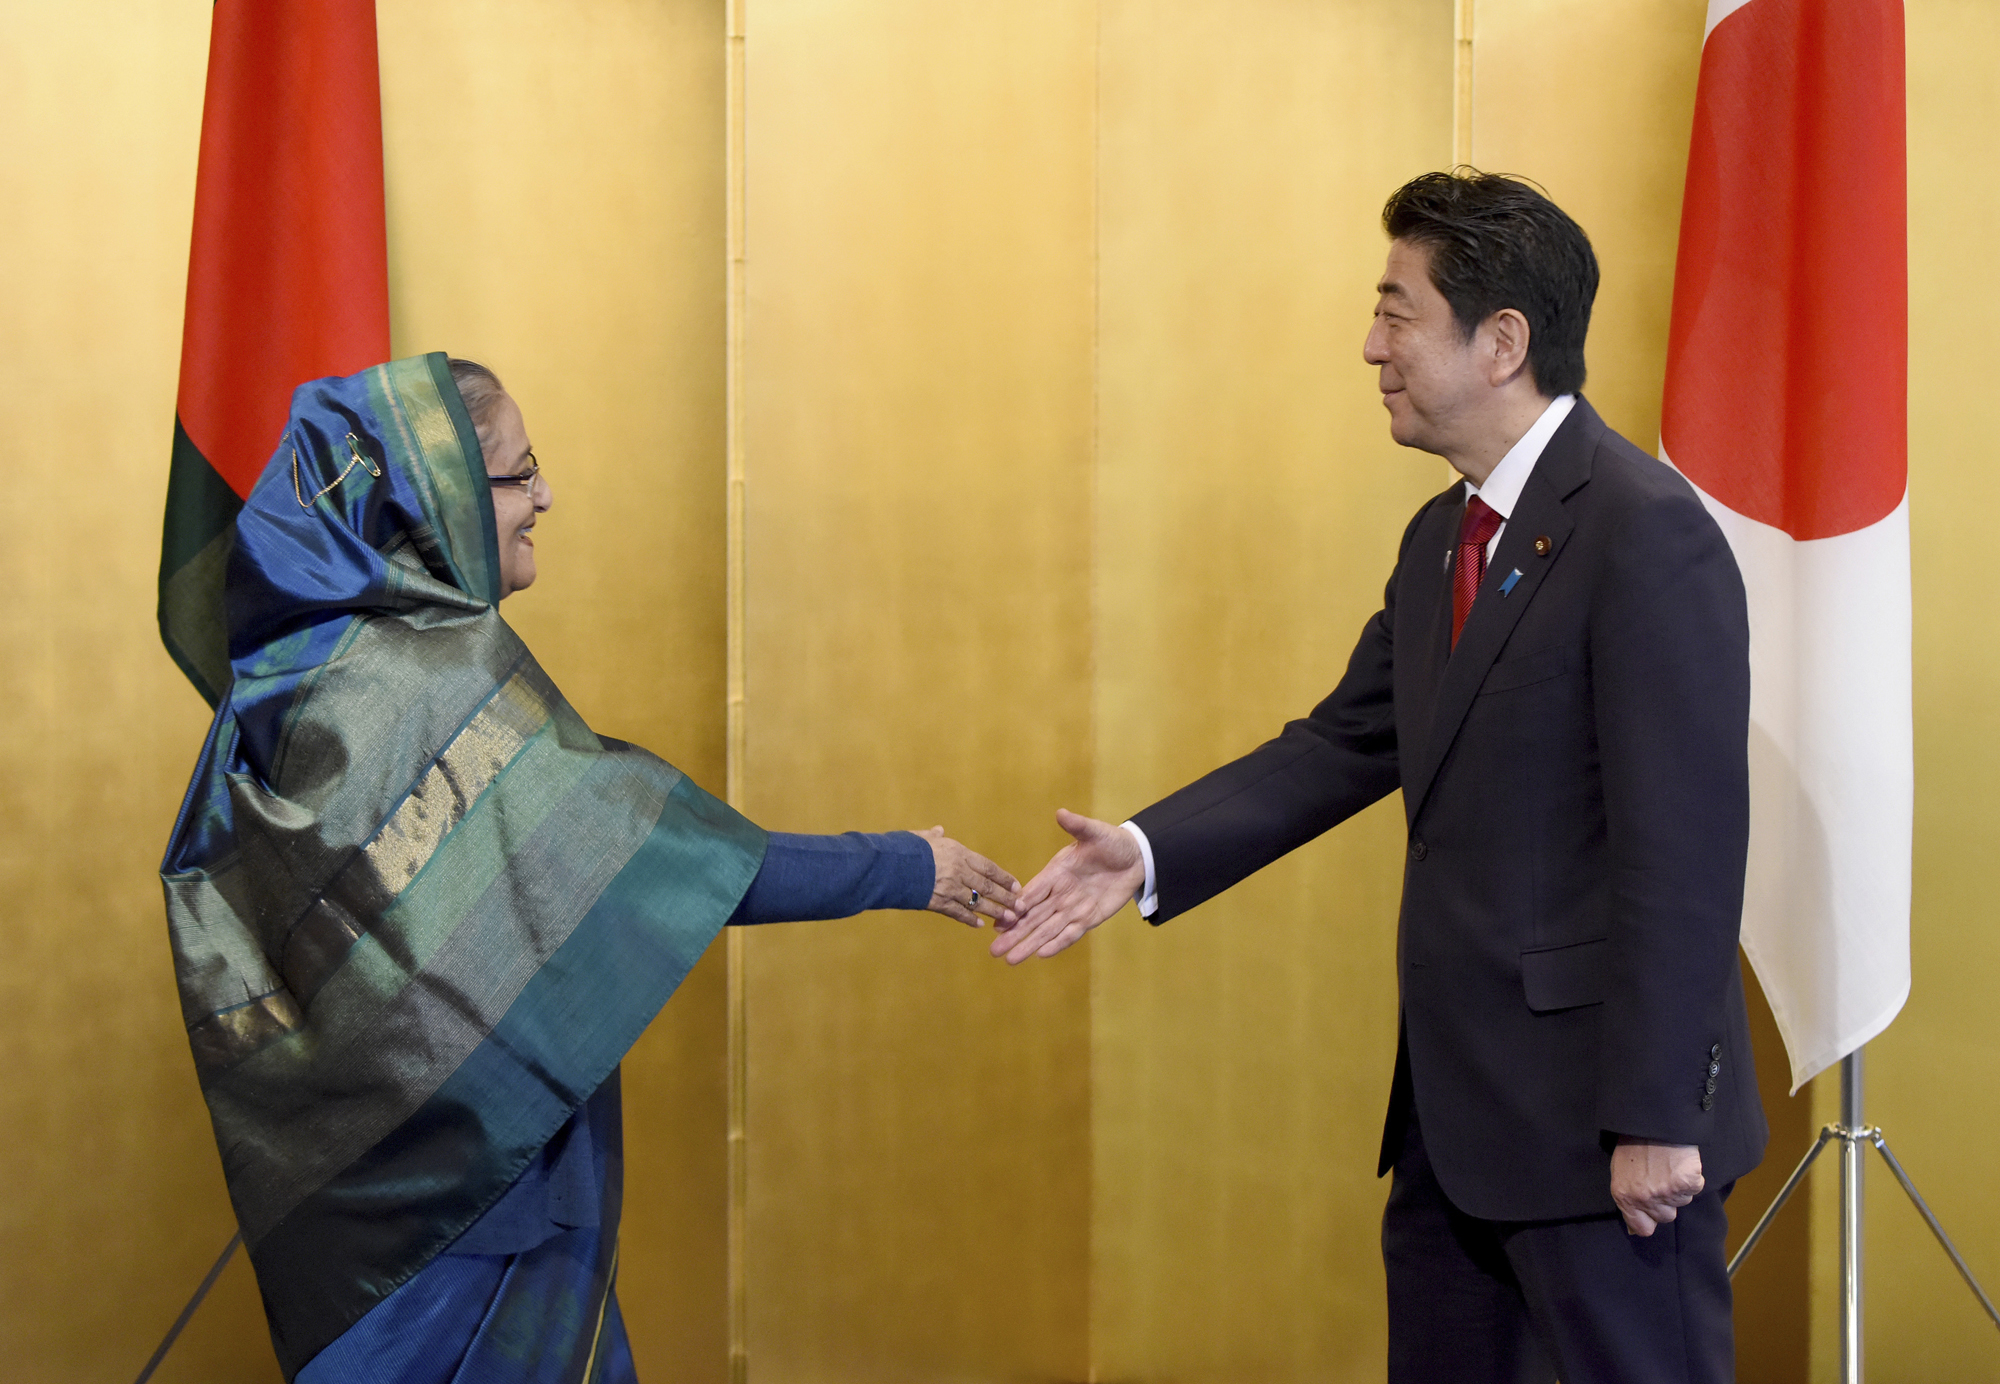 Prime Minister Shinzo Abe welcomes Bangladesh Prime Minister Sheikh Hasina before holding talks on May 28, 2016. The two leaders will meet again this week in Tokyo. | AP